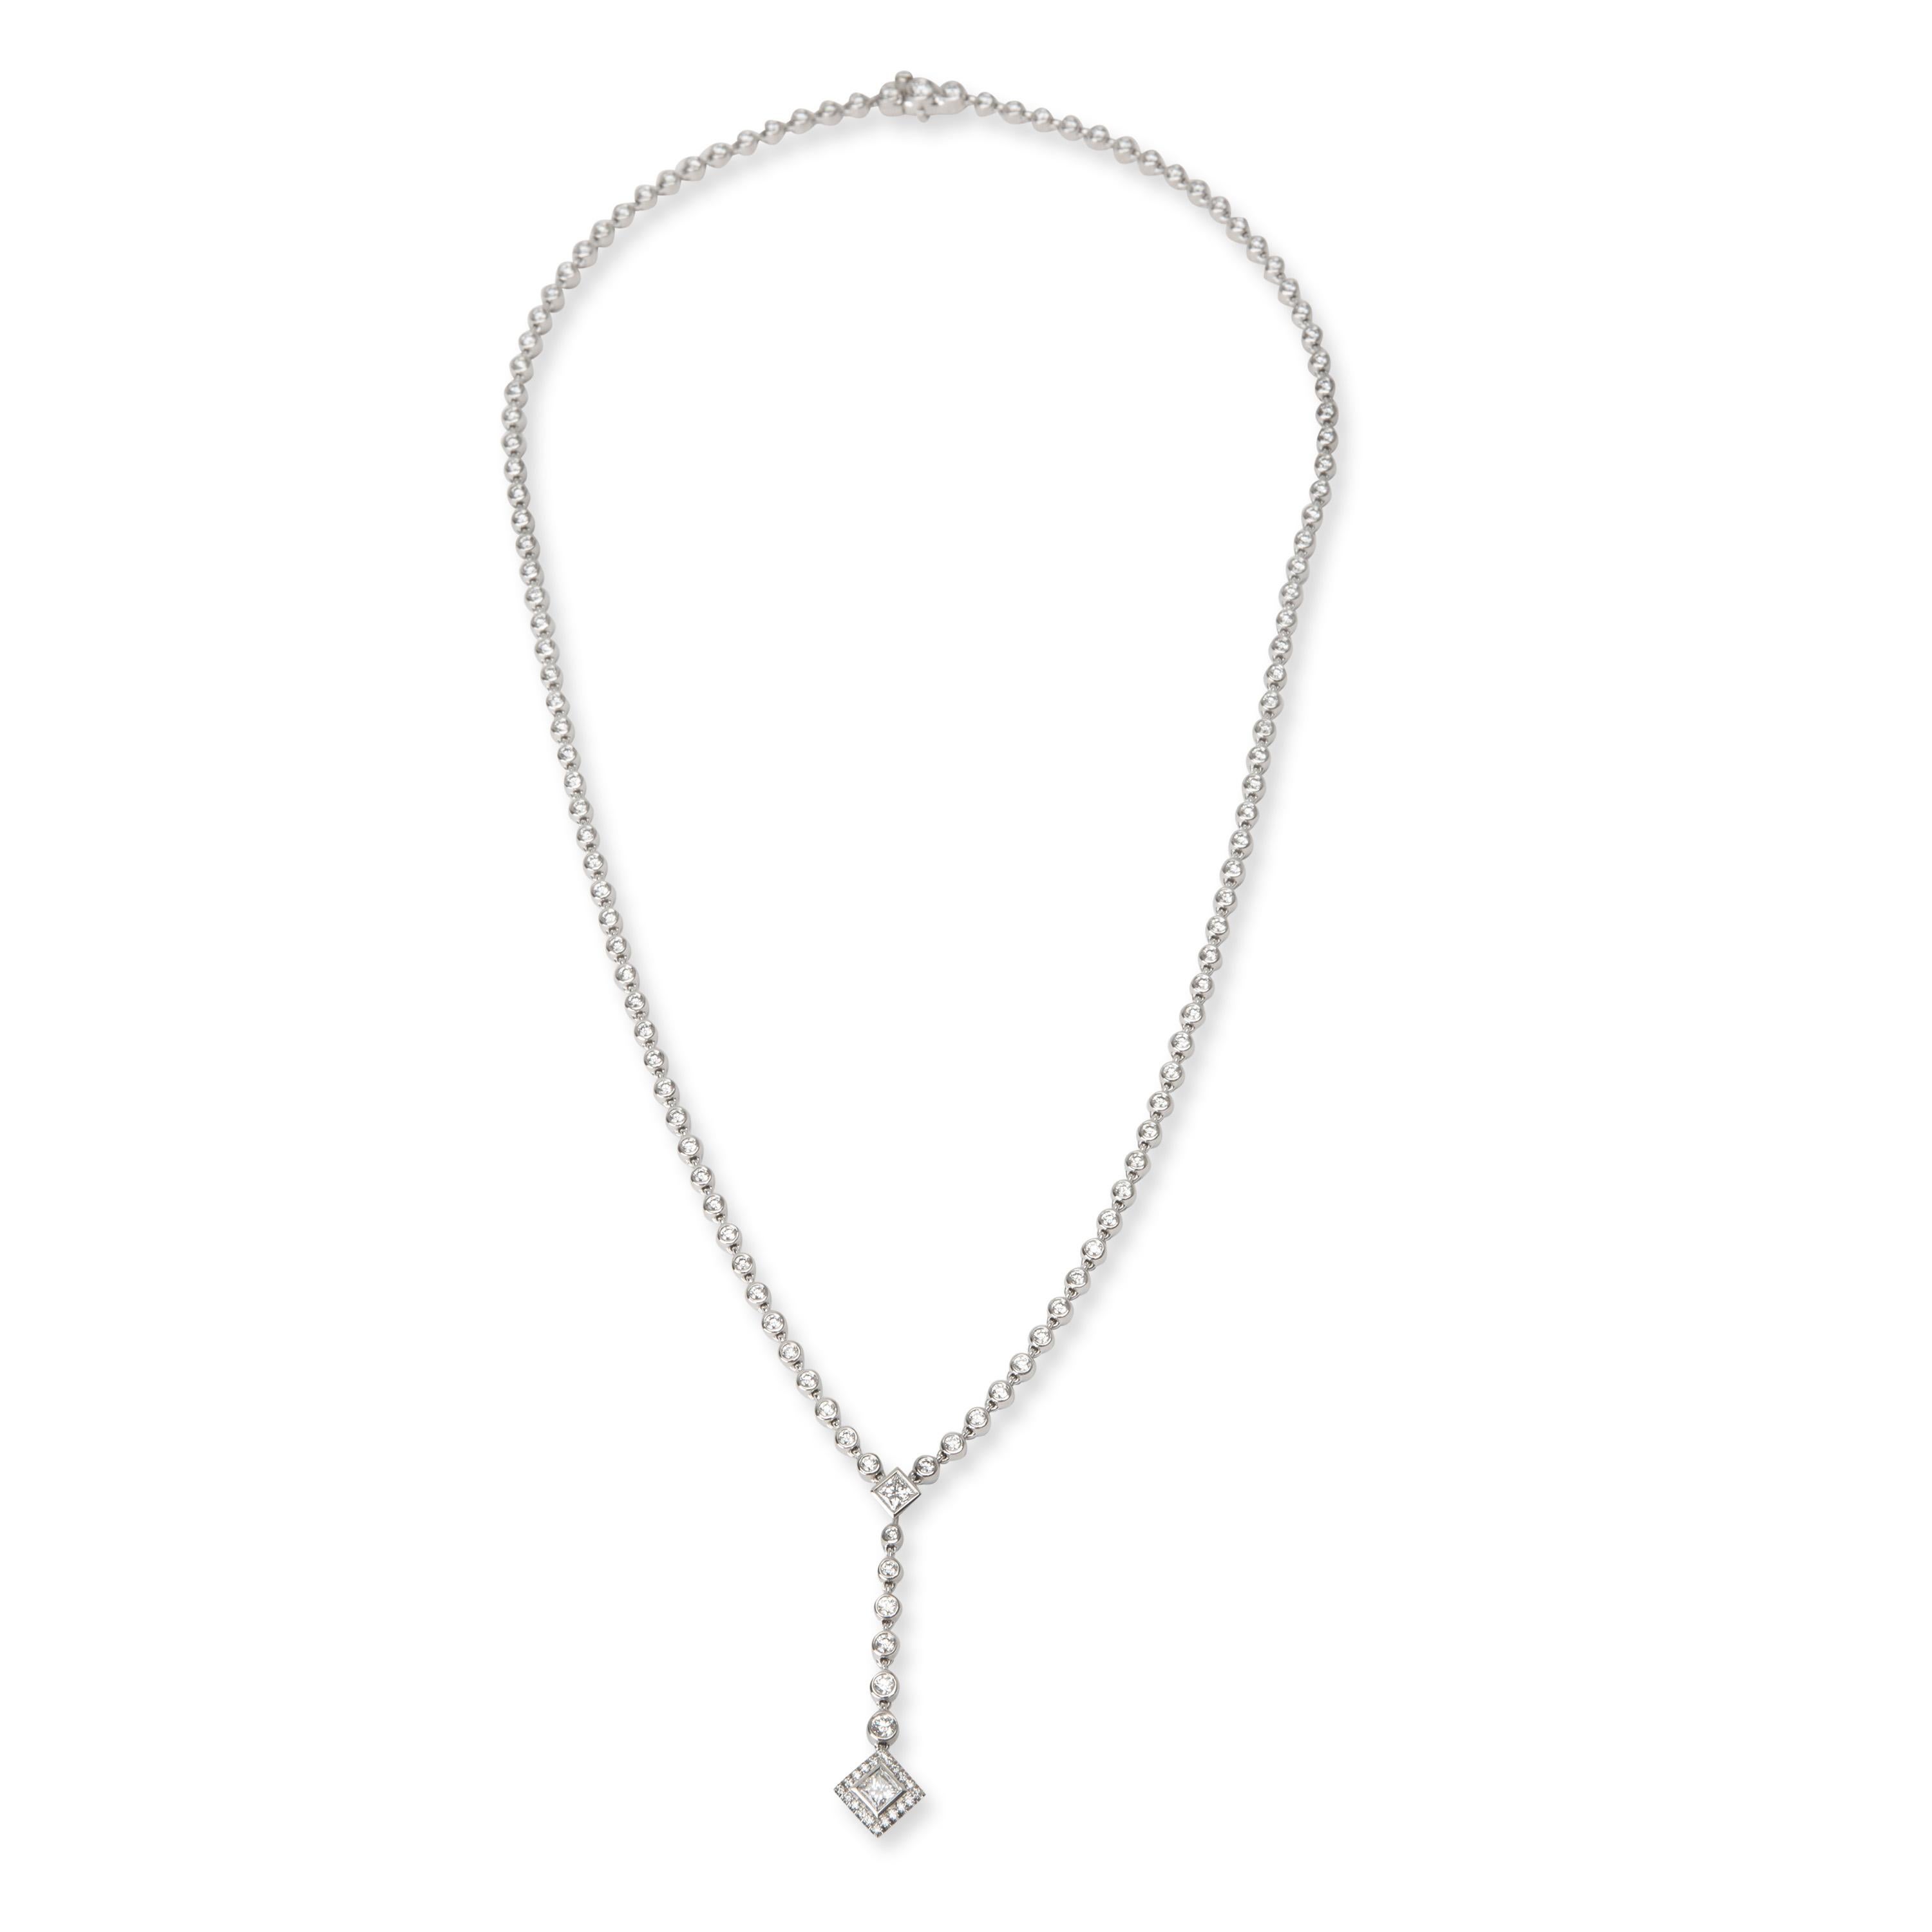 Retails for $25,000 USD. In excellent condition and recently polished. Necklace is 20 inches in length.

Brand: Tiffany & Co.
Collection/Series: Grace
Metal Type: Platinum

Gem Type: Diamond
Gem Weight 1 (cts): 4.10
Gem Shape: Mix
Gem Color: F-G
Gem